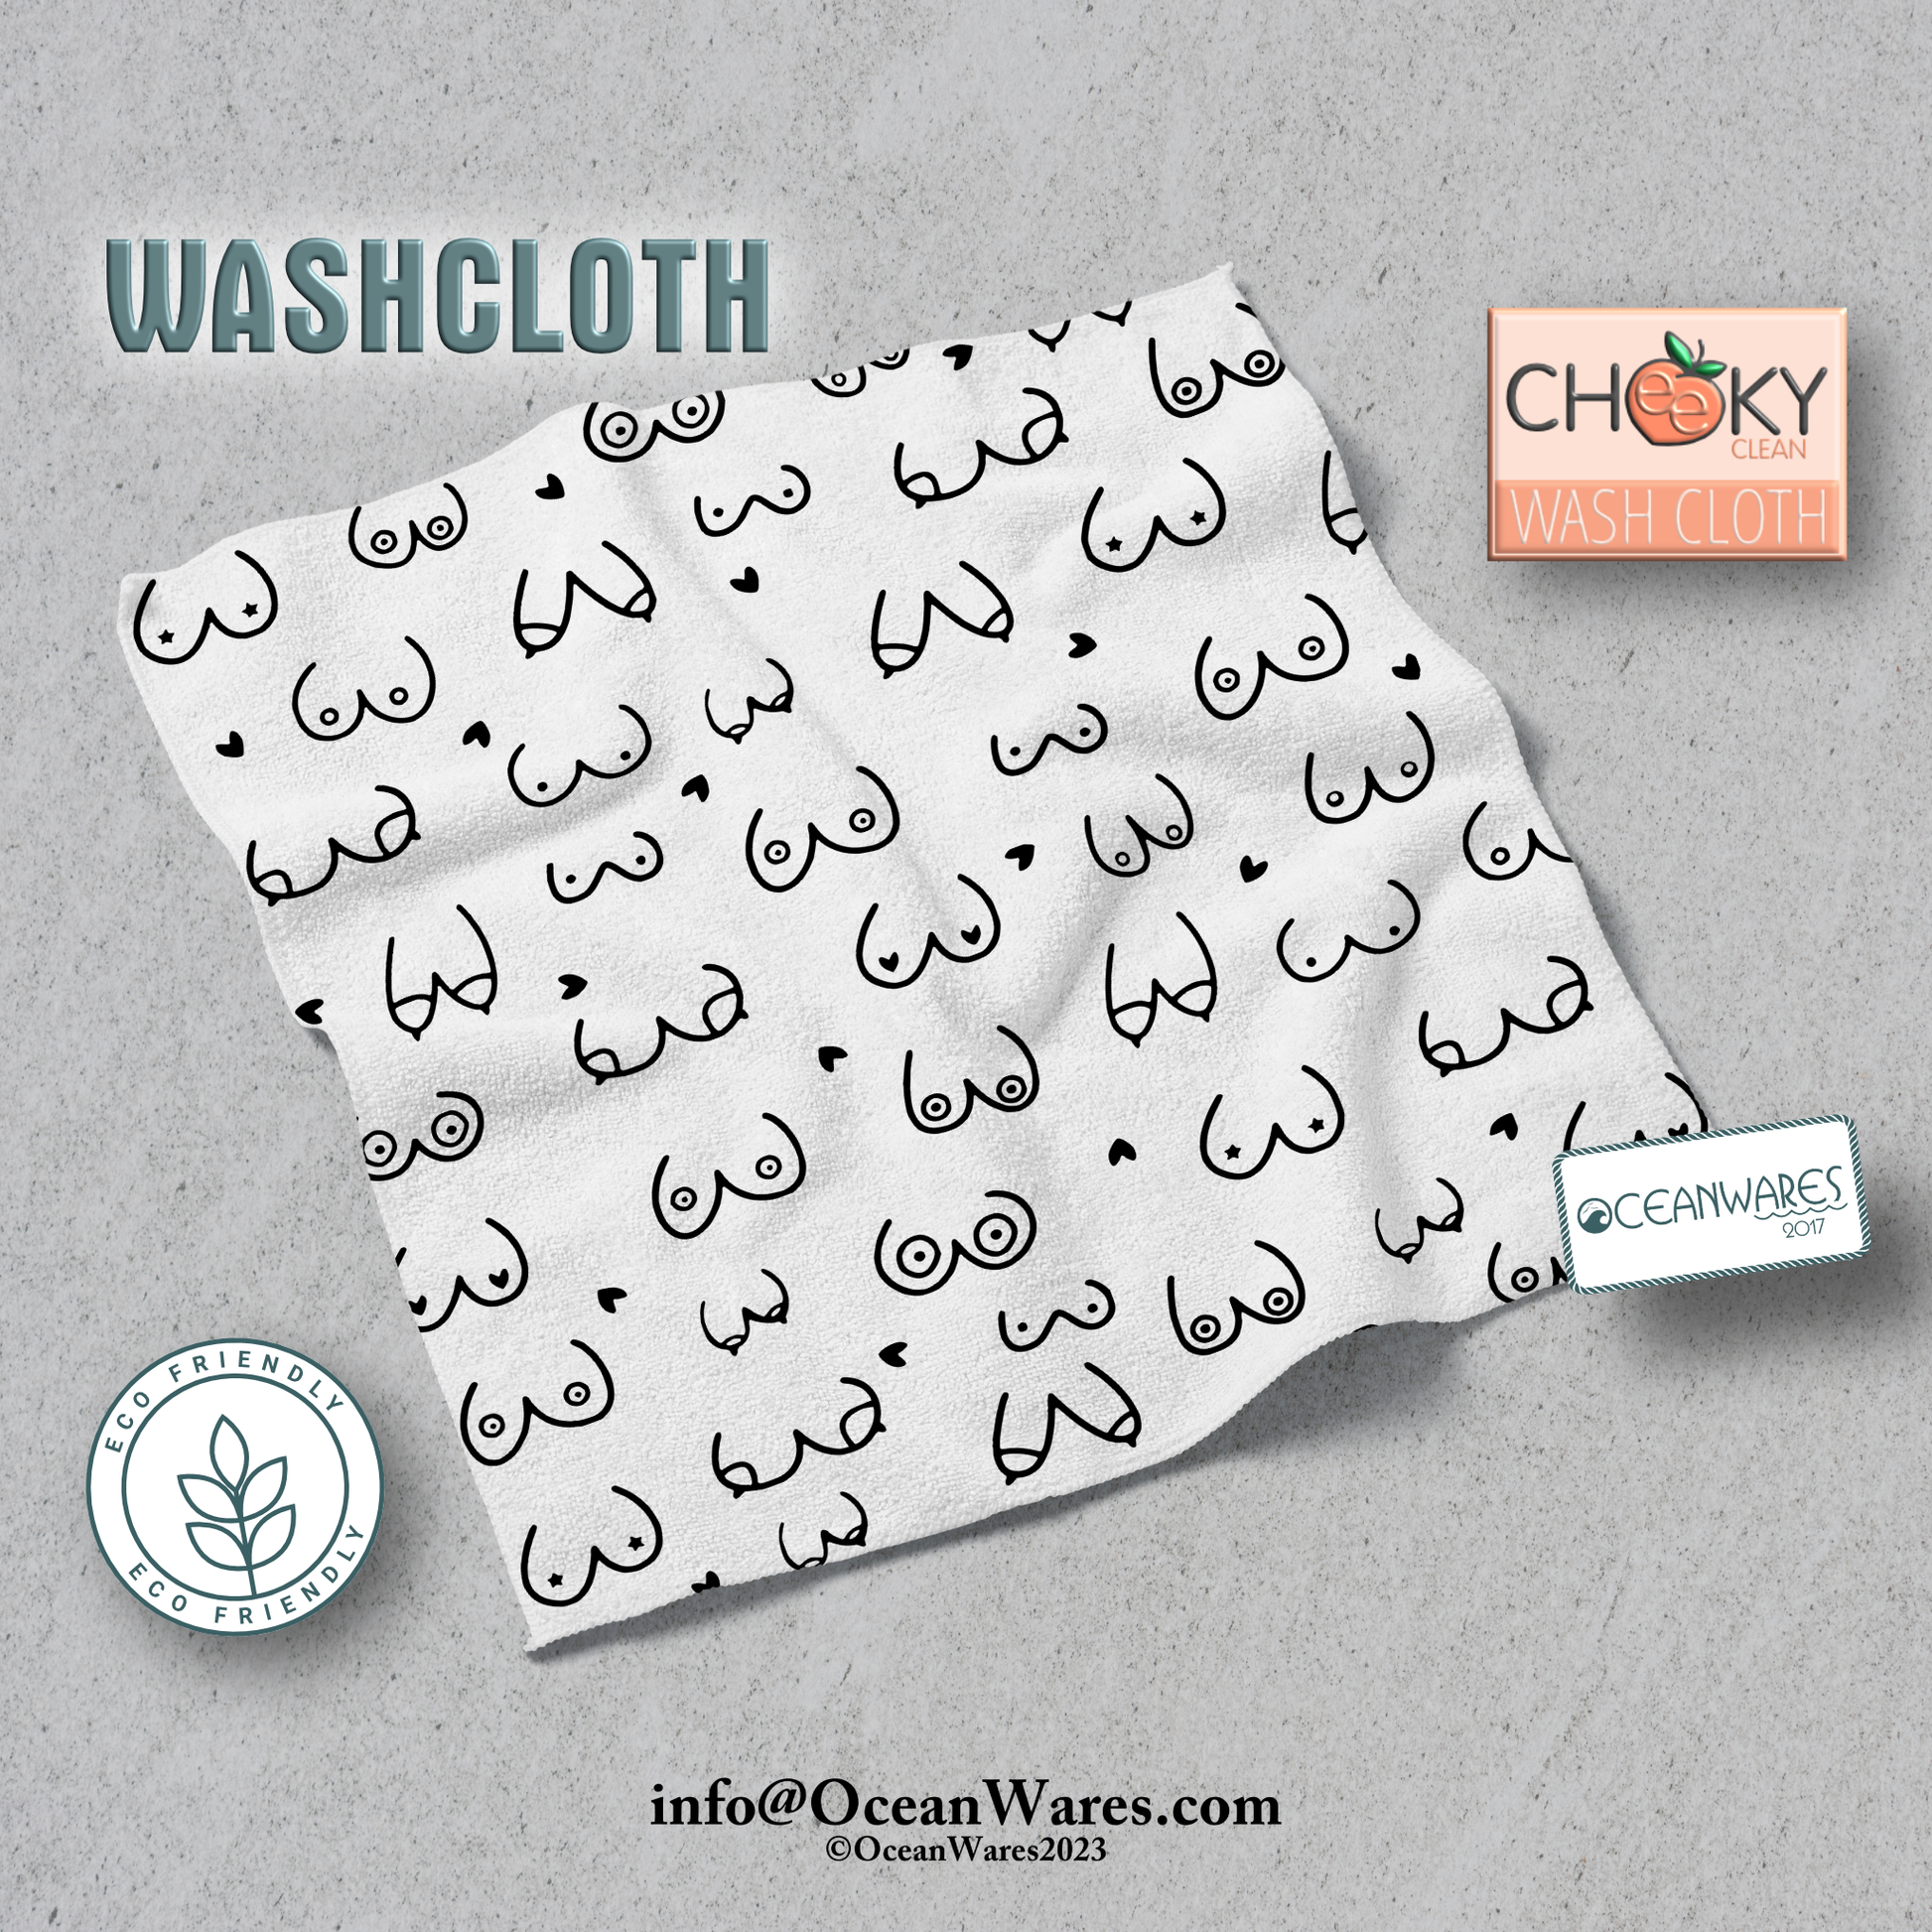 Boobies by Cheeky Clean, Body Empowerment Washcloth - Elevate Confidence.